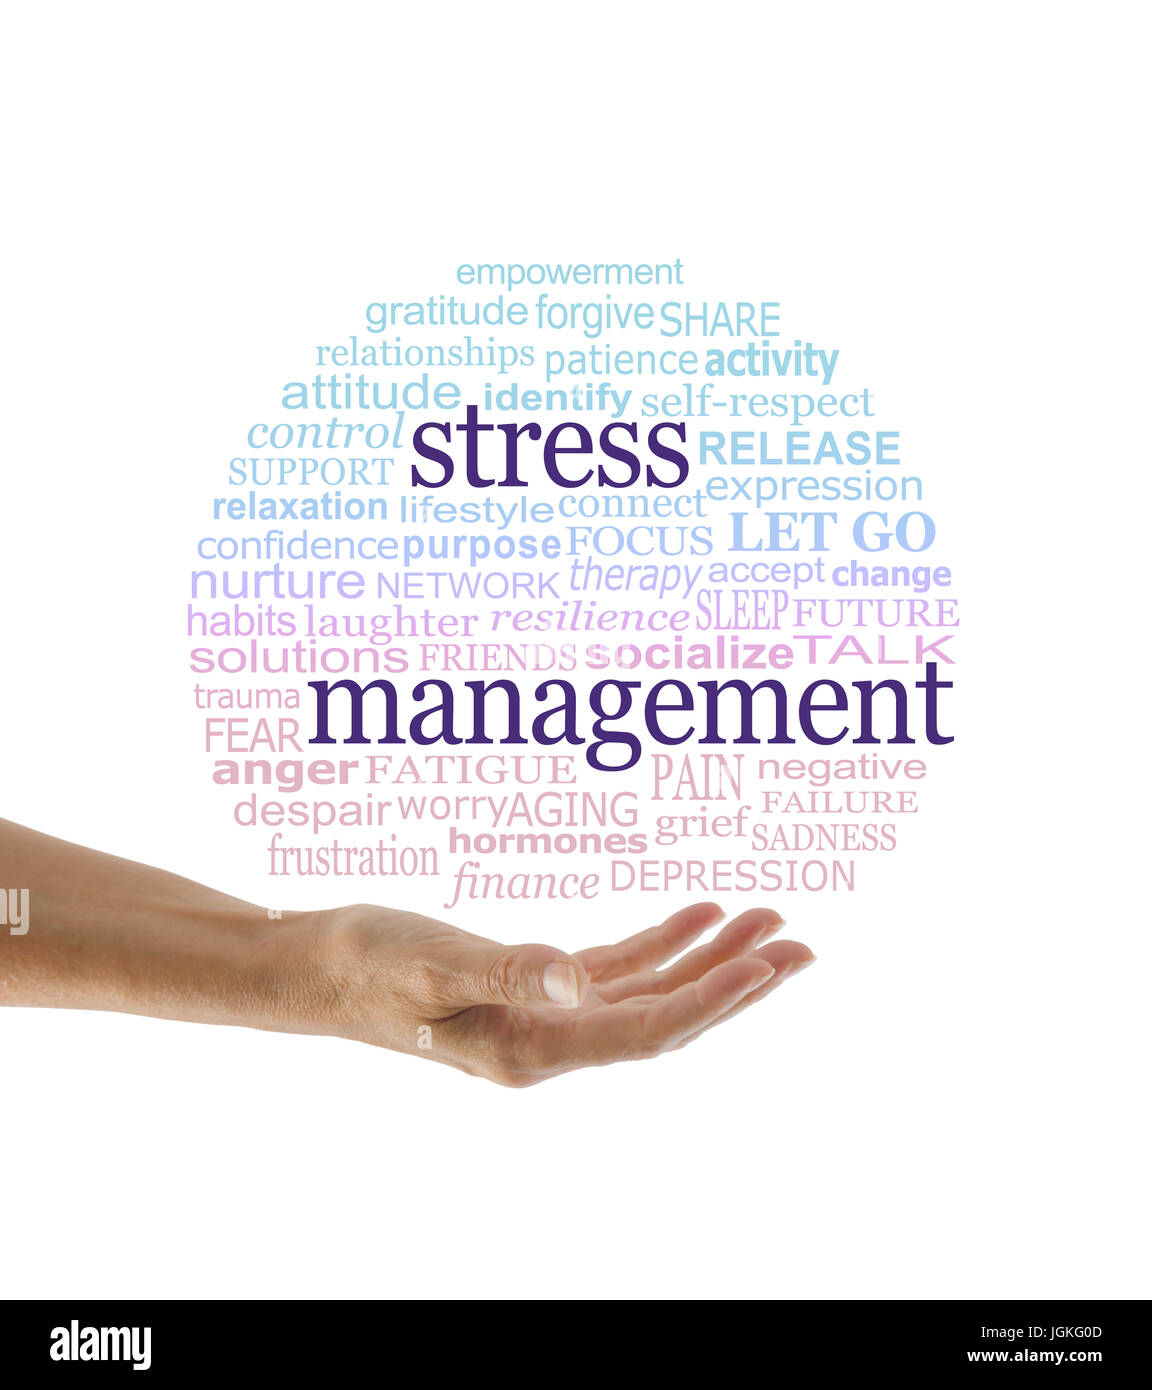 Elements of Stress Management word cloud -  a hand held open with a red to blue circular word cloud containing words relevant to stress management Stock Photo